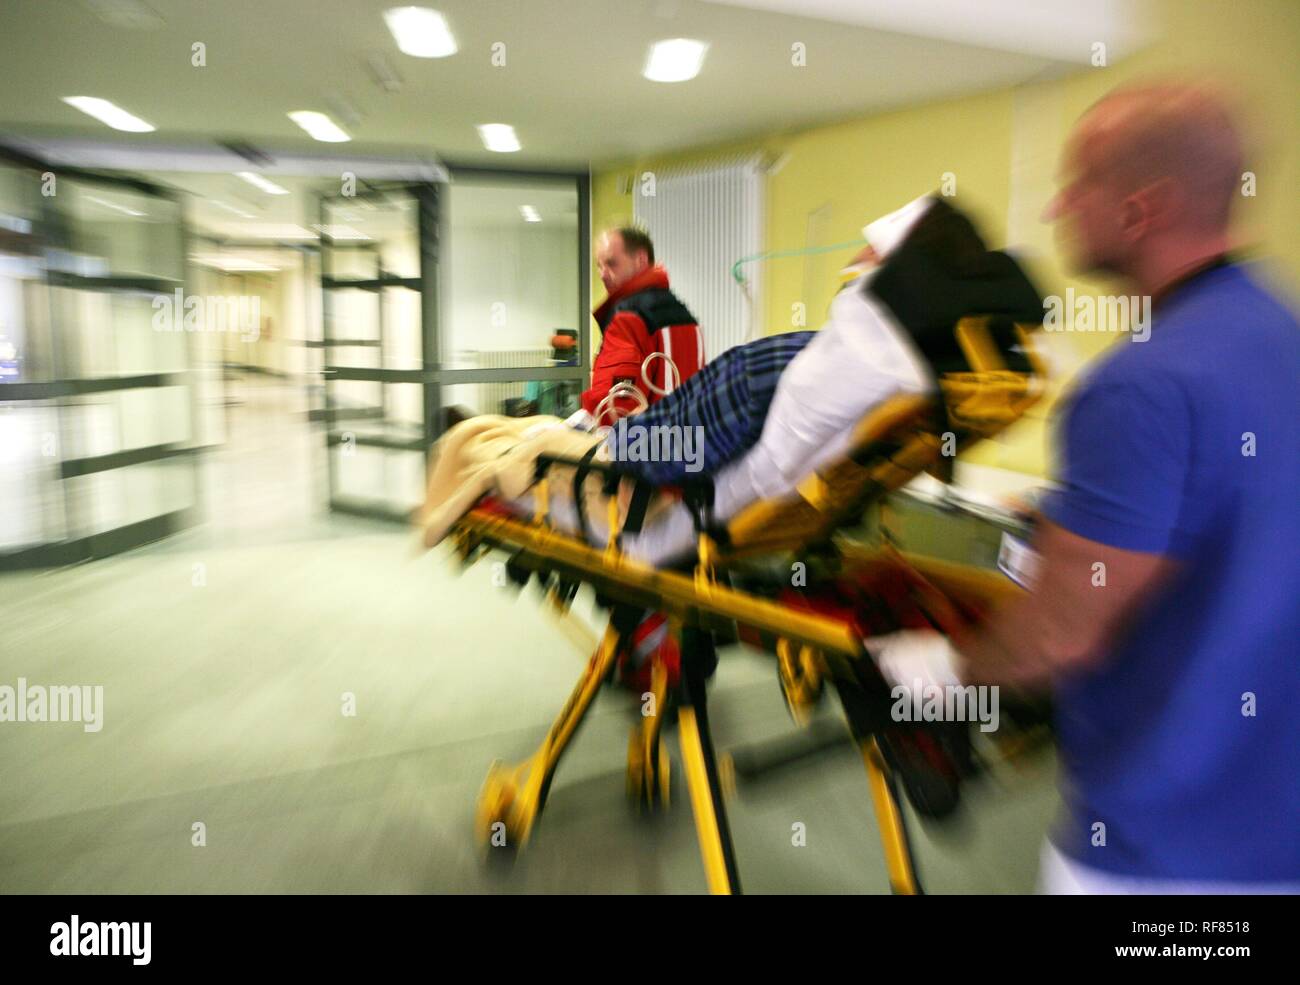 Casualty unit, emergency room of a hospital, Germany Stock Photo